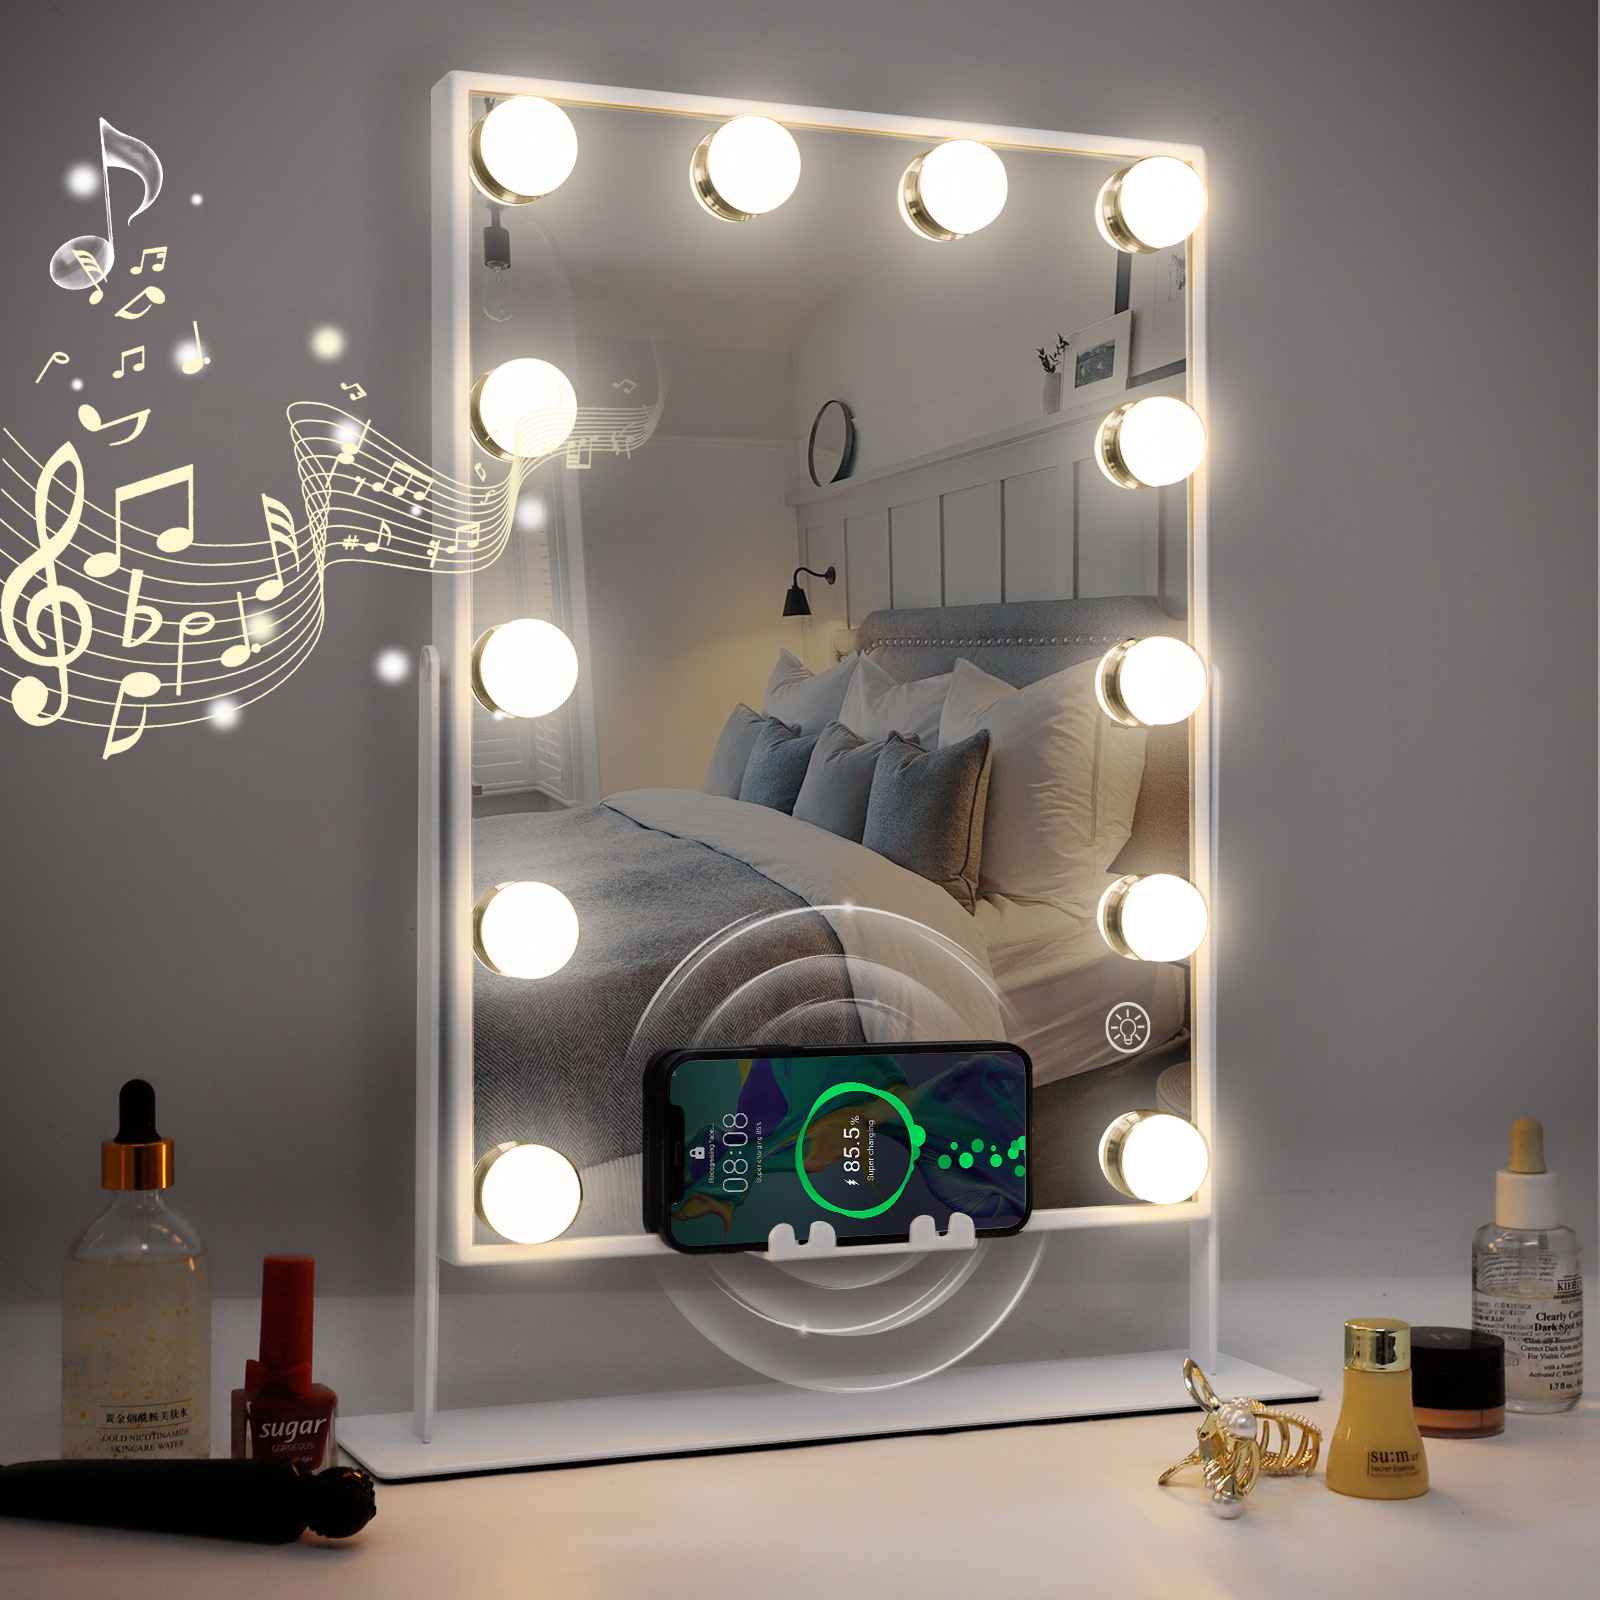 COOLJEEN Bluetooth Hollywood Vanity Makeup Mirror with Lights Wireless Charging Metal Tabletop White - image 1 of 9